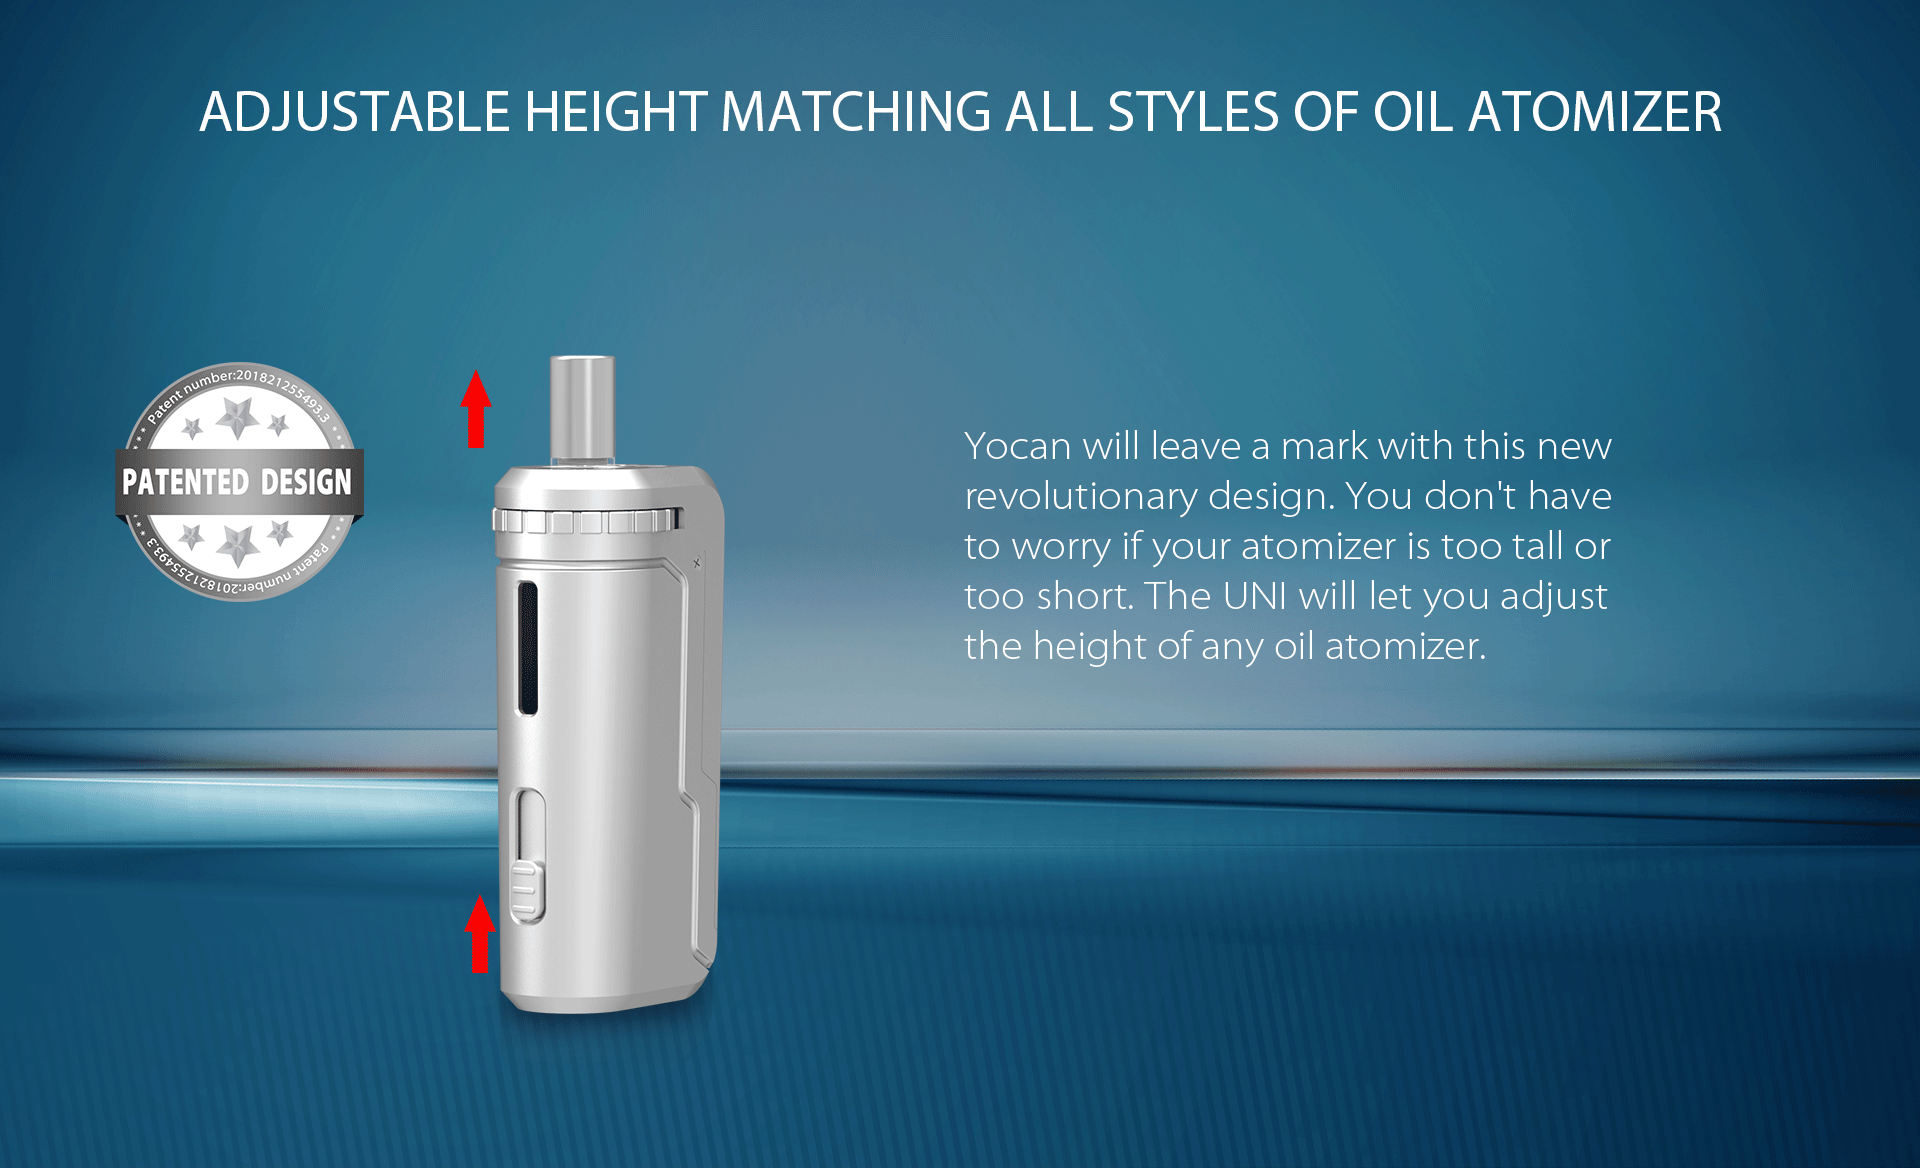 Yocan UNI box mod will let you adjust the height of any oil atomizer.